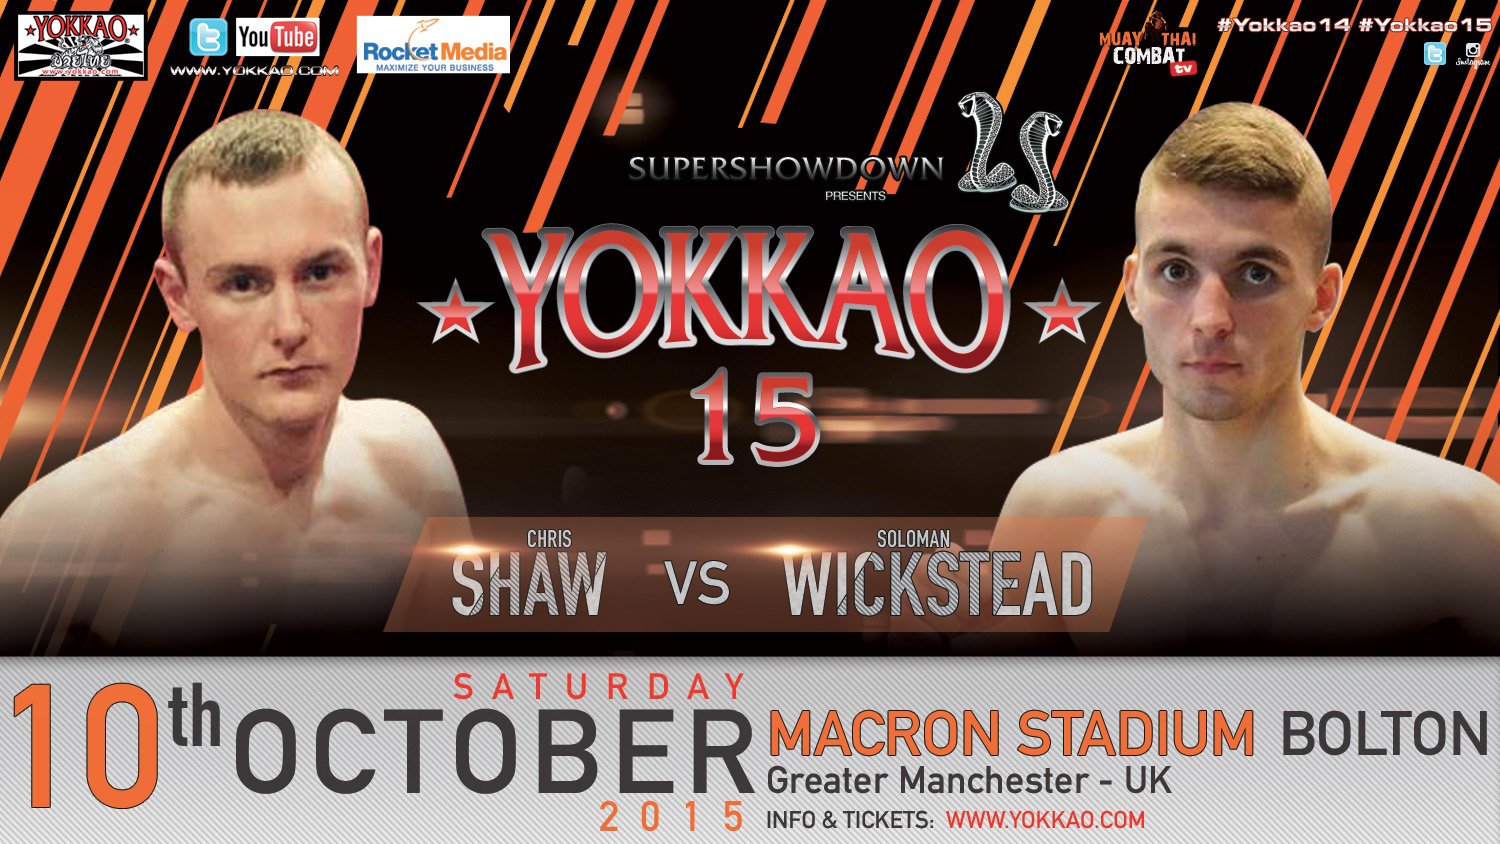 YOKKAO 15 Soloman Wickstead: “I Can't Be Beat, I Feel on Top of The World”